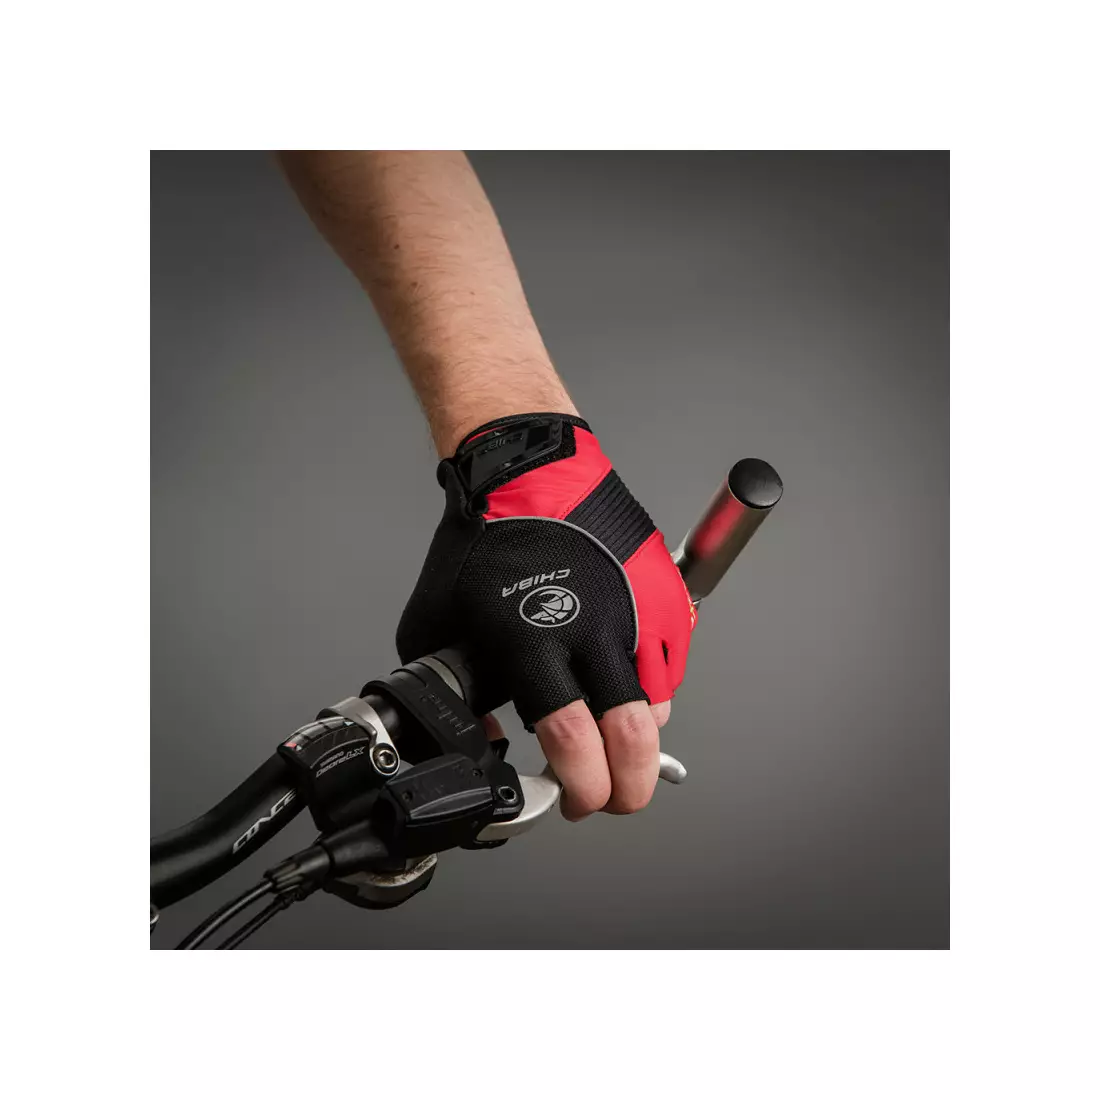 CHIBA bicycle gloves bioxcell red 3060120 